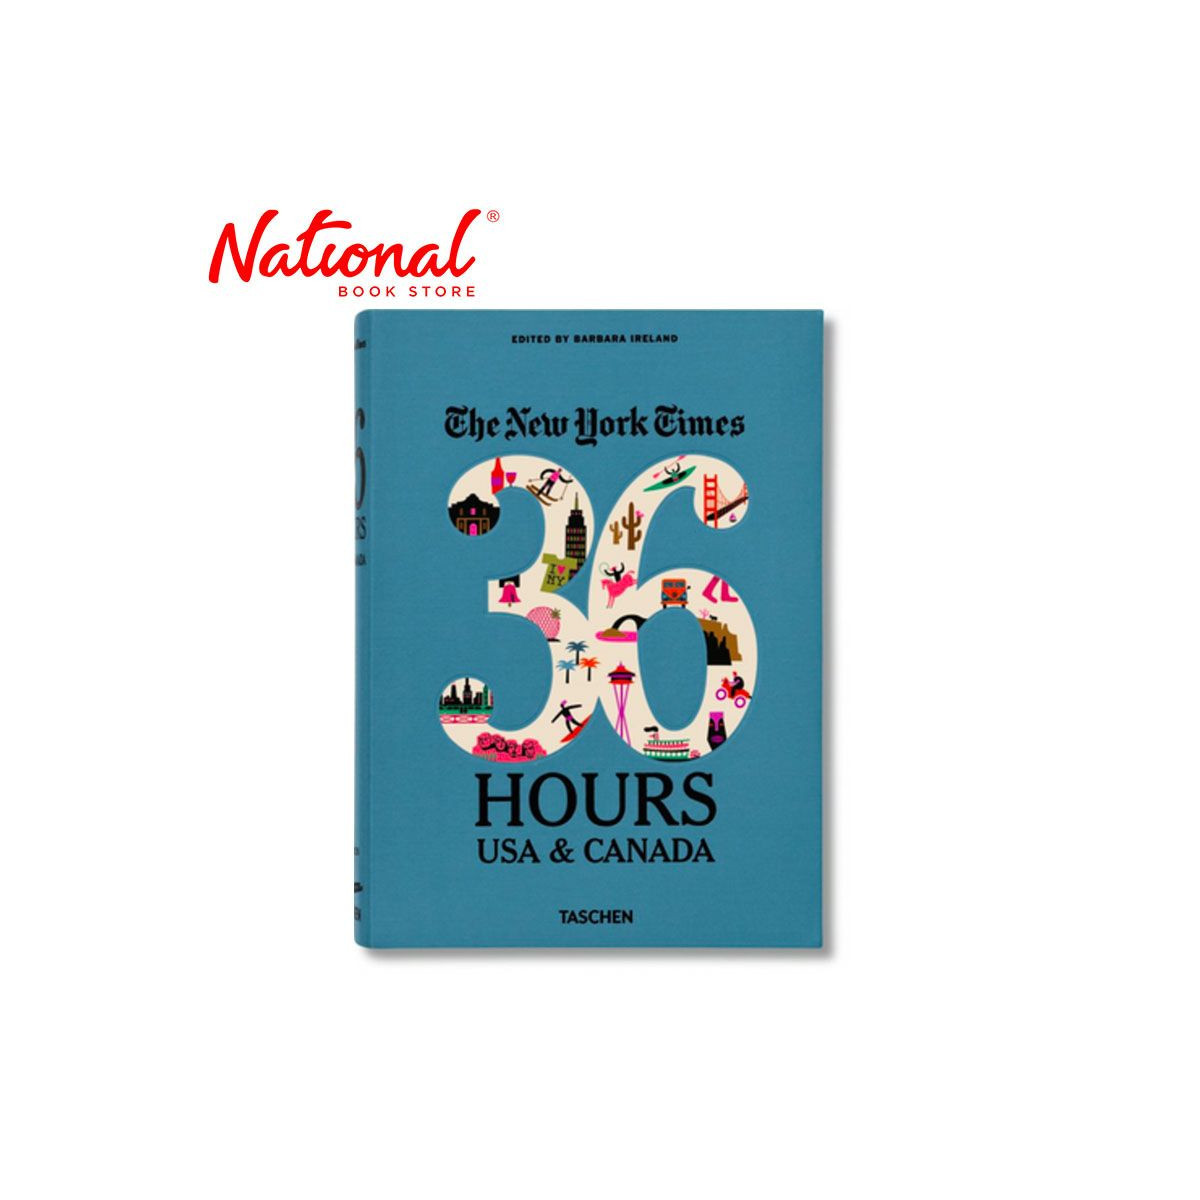 The New York Times 36 Hours USA & Canada 2nd Edition Hardcover by Barbara Ireland - Travel Guides